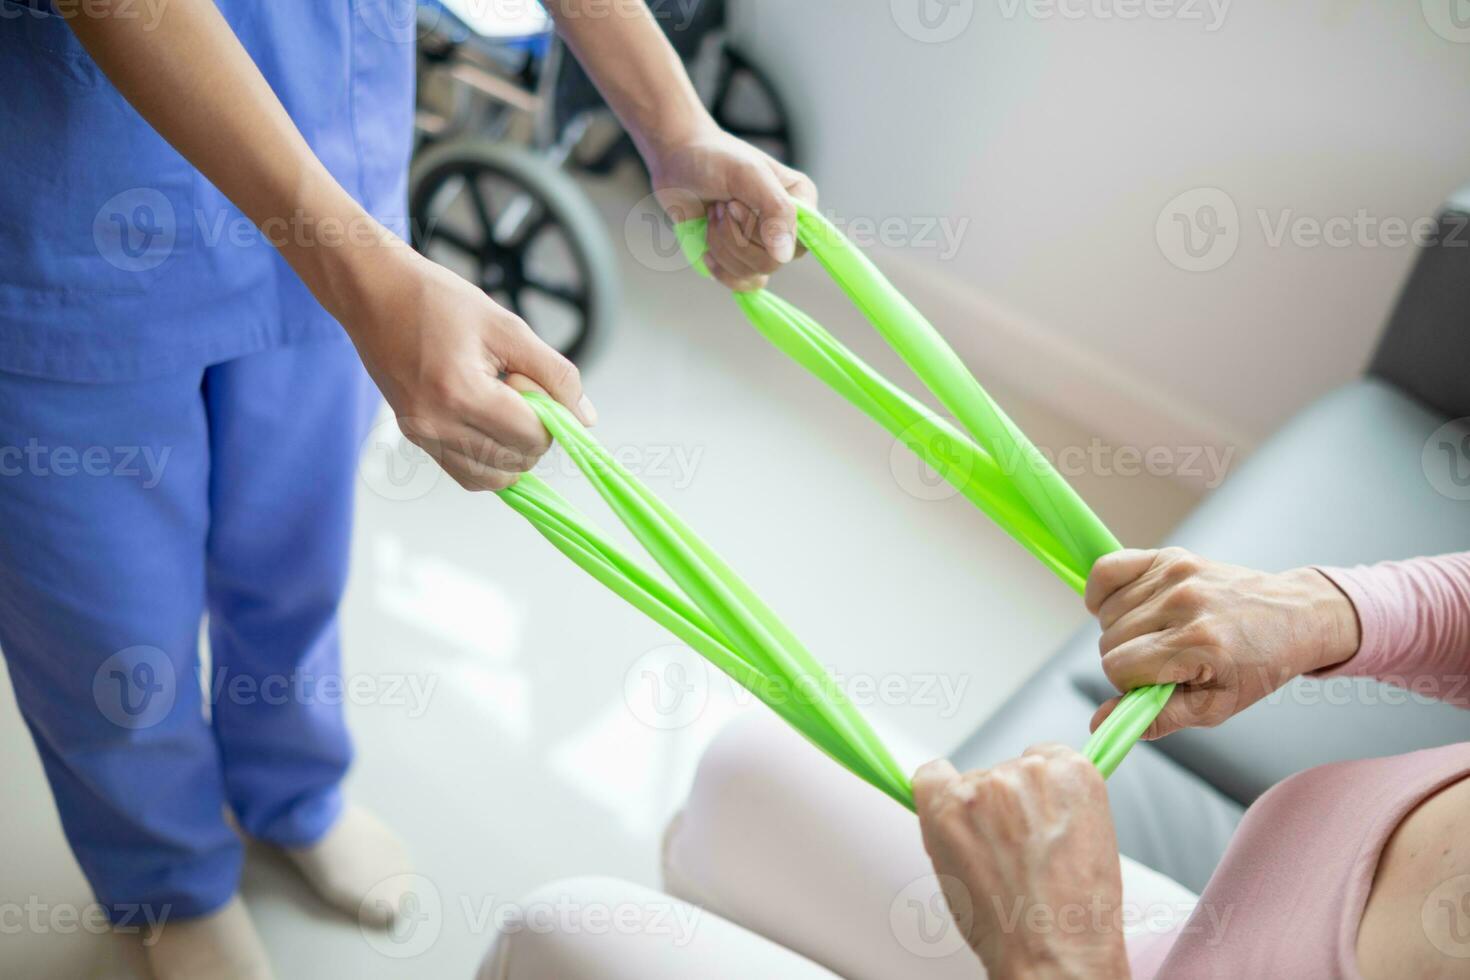 Physical therapists are helping elderly people to take care of themselves after a long period of recovery and they need regular physical therapy to help their bodies recover. physical therapy concept photo